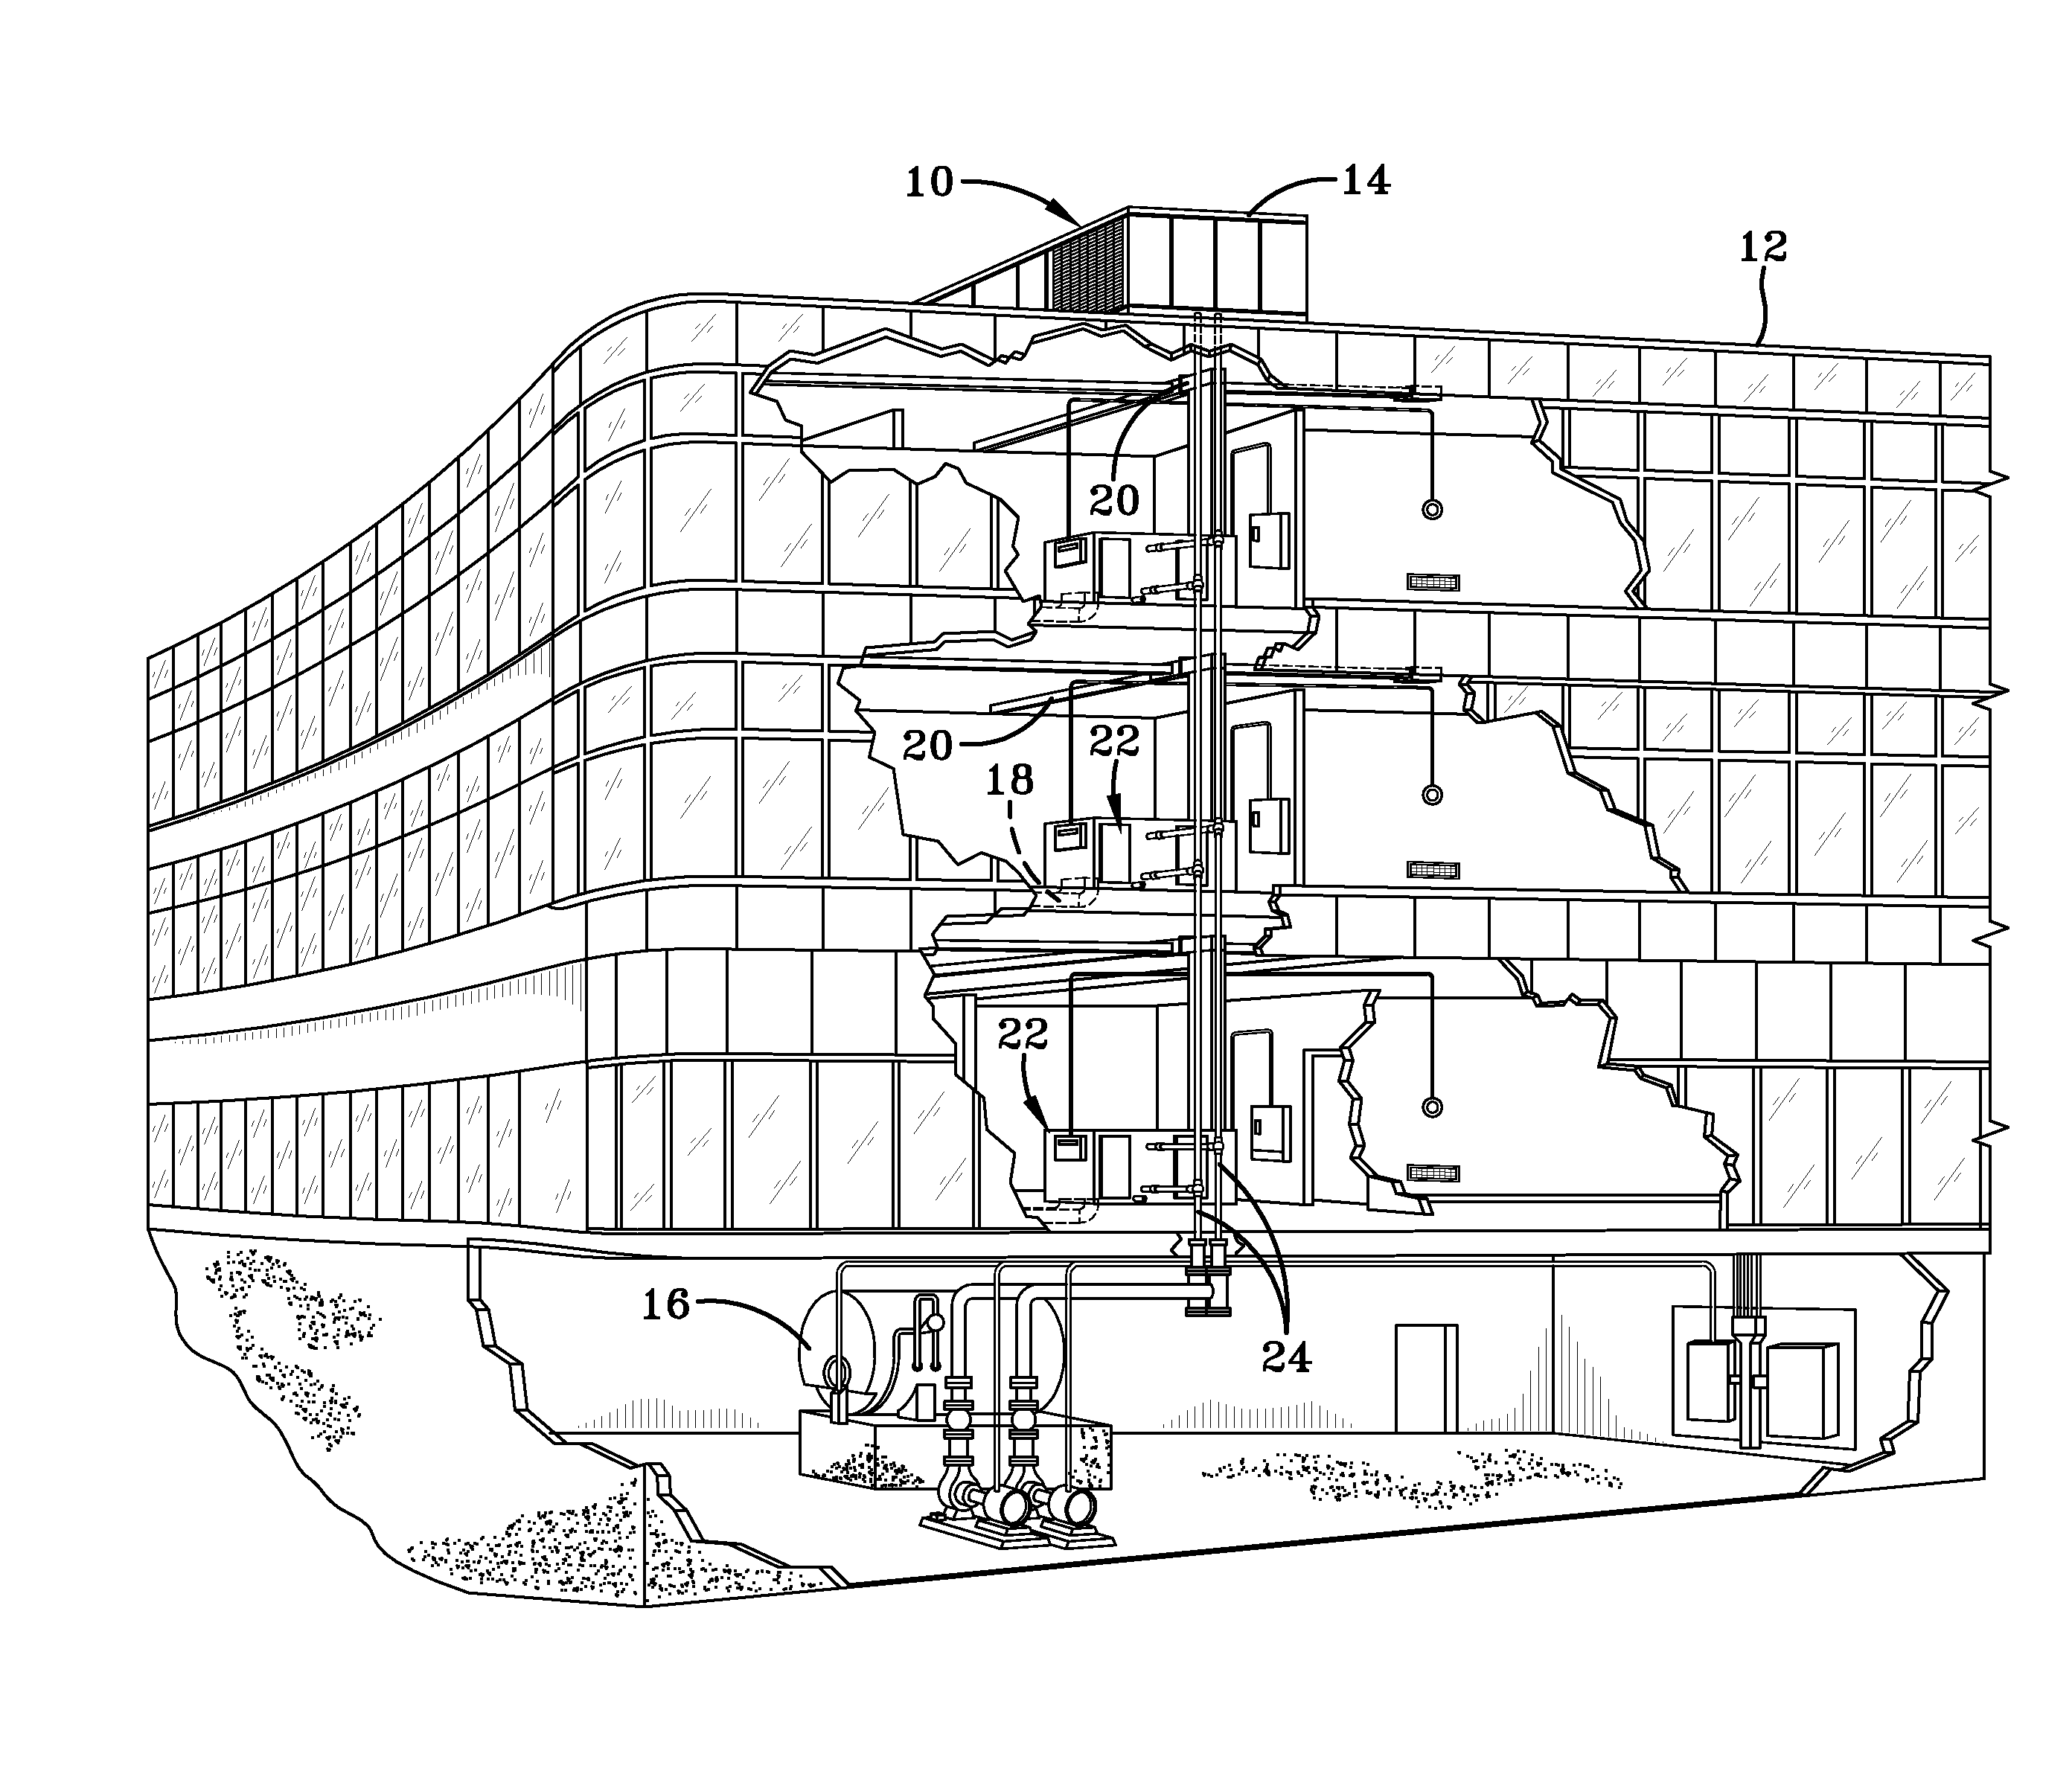 Heat exchanger having stacked coil sections